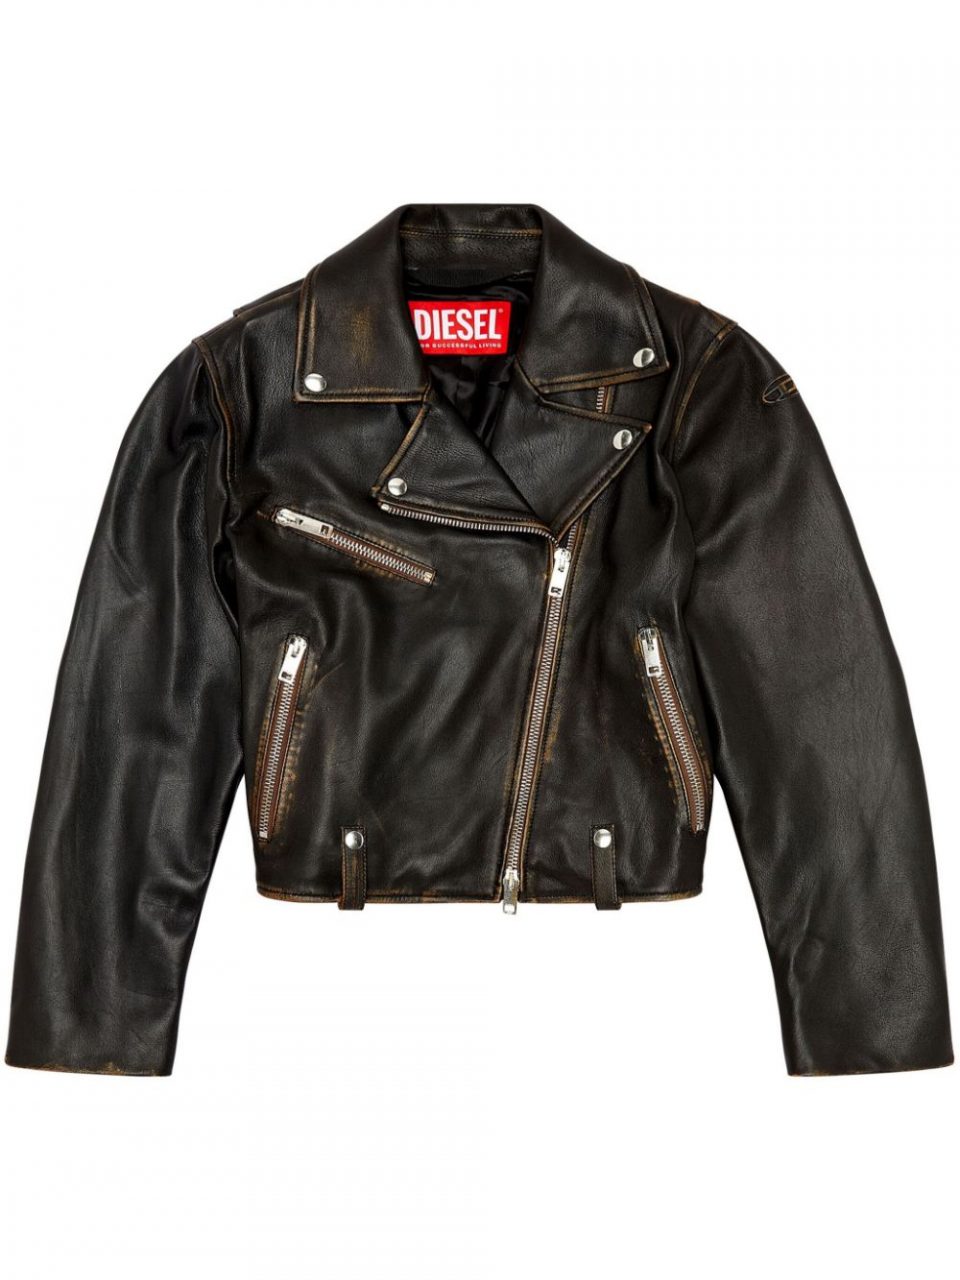 Are Leather Jackets in Style? Fashion Staple or Fading Trend? – Eiken Shop